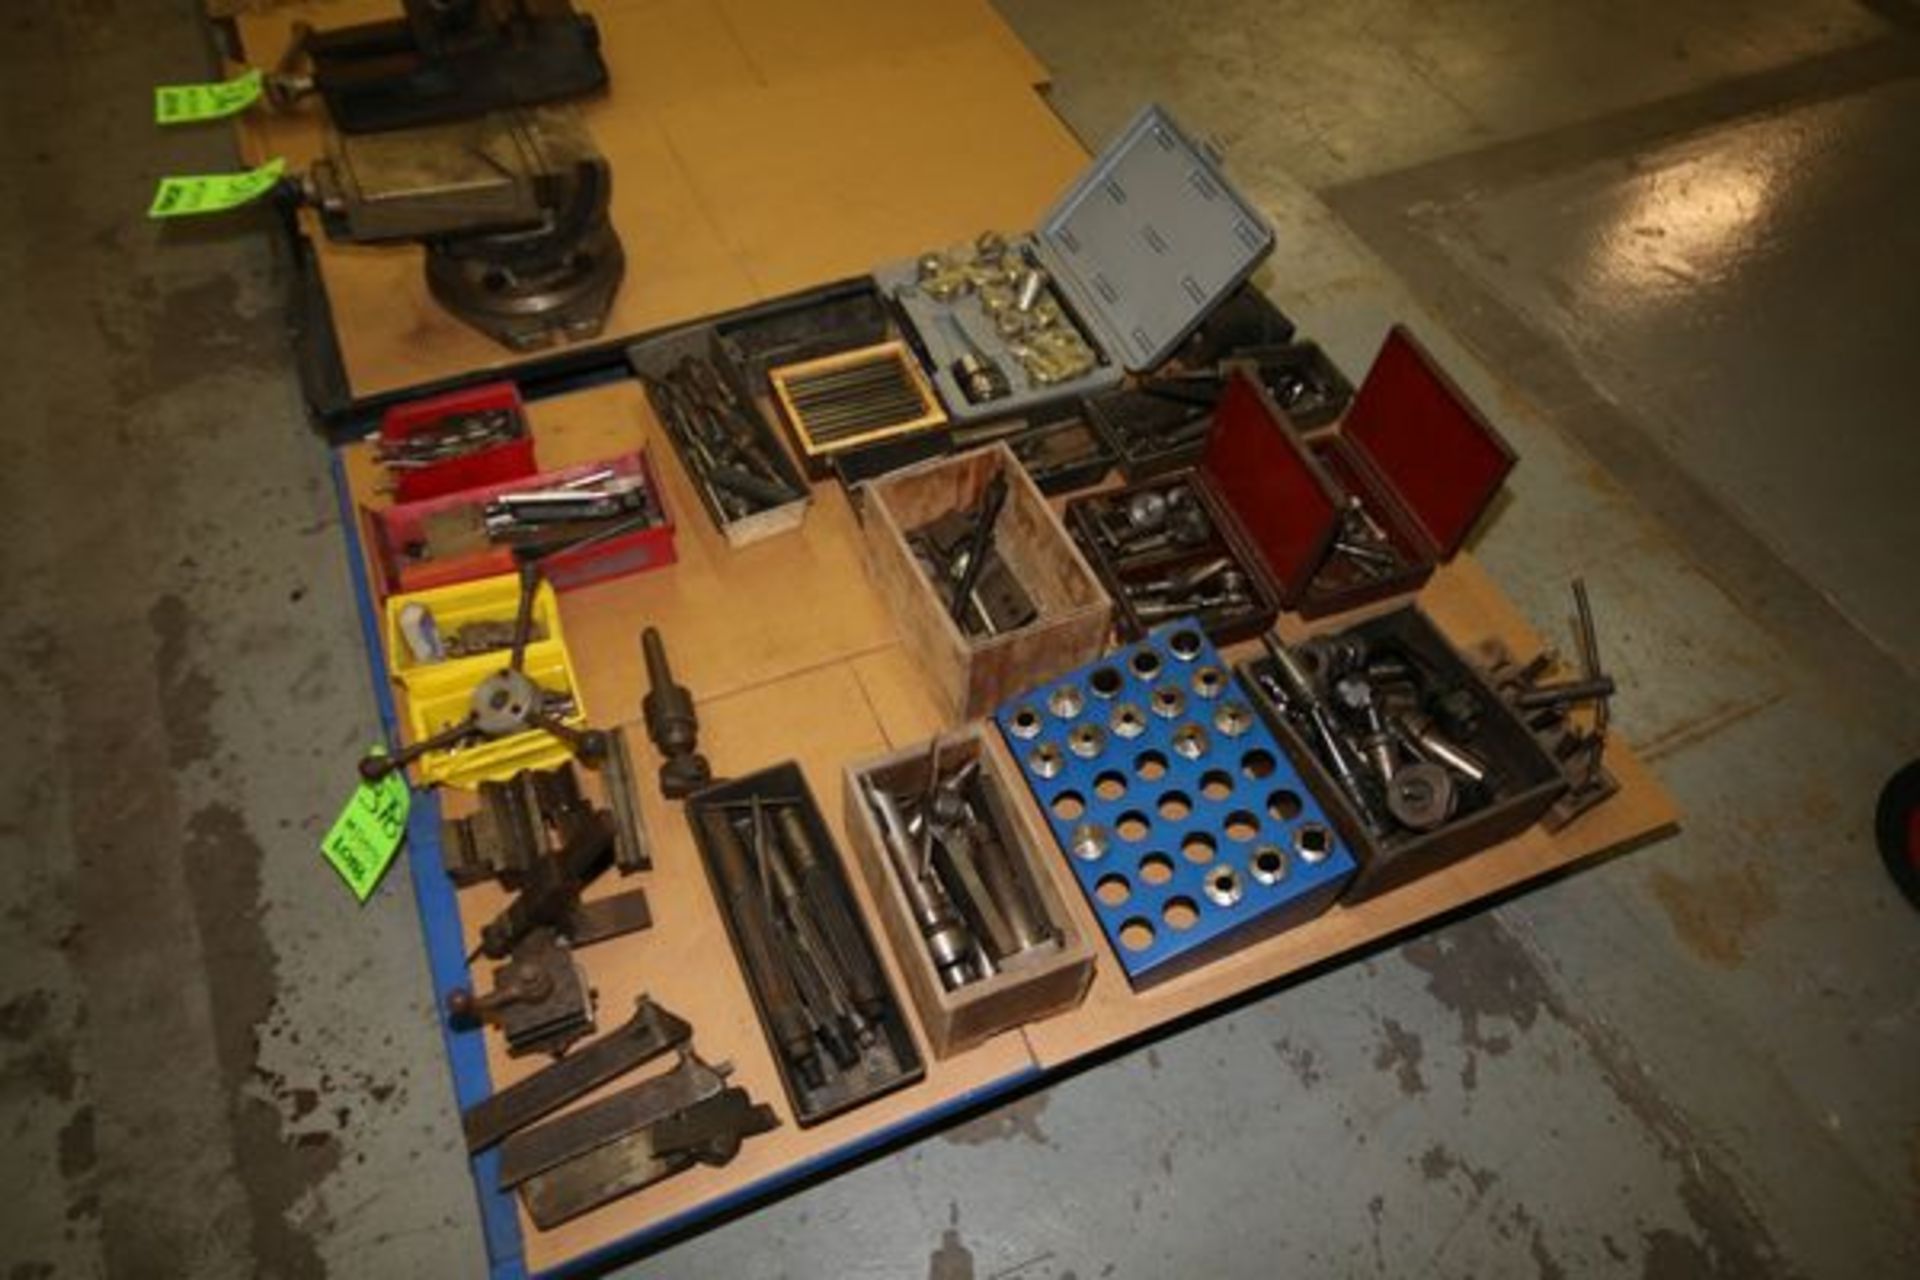 Lot of Assorted Machine Shop Parts, Including Drill Bits, Mills, Tool Holders, and Others - Image 2 of 2